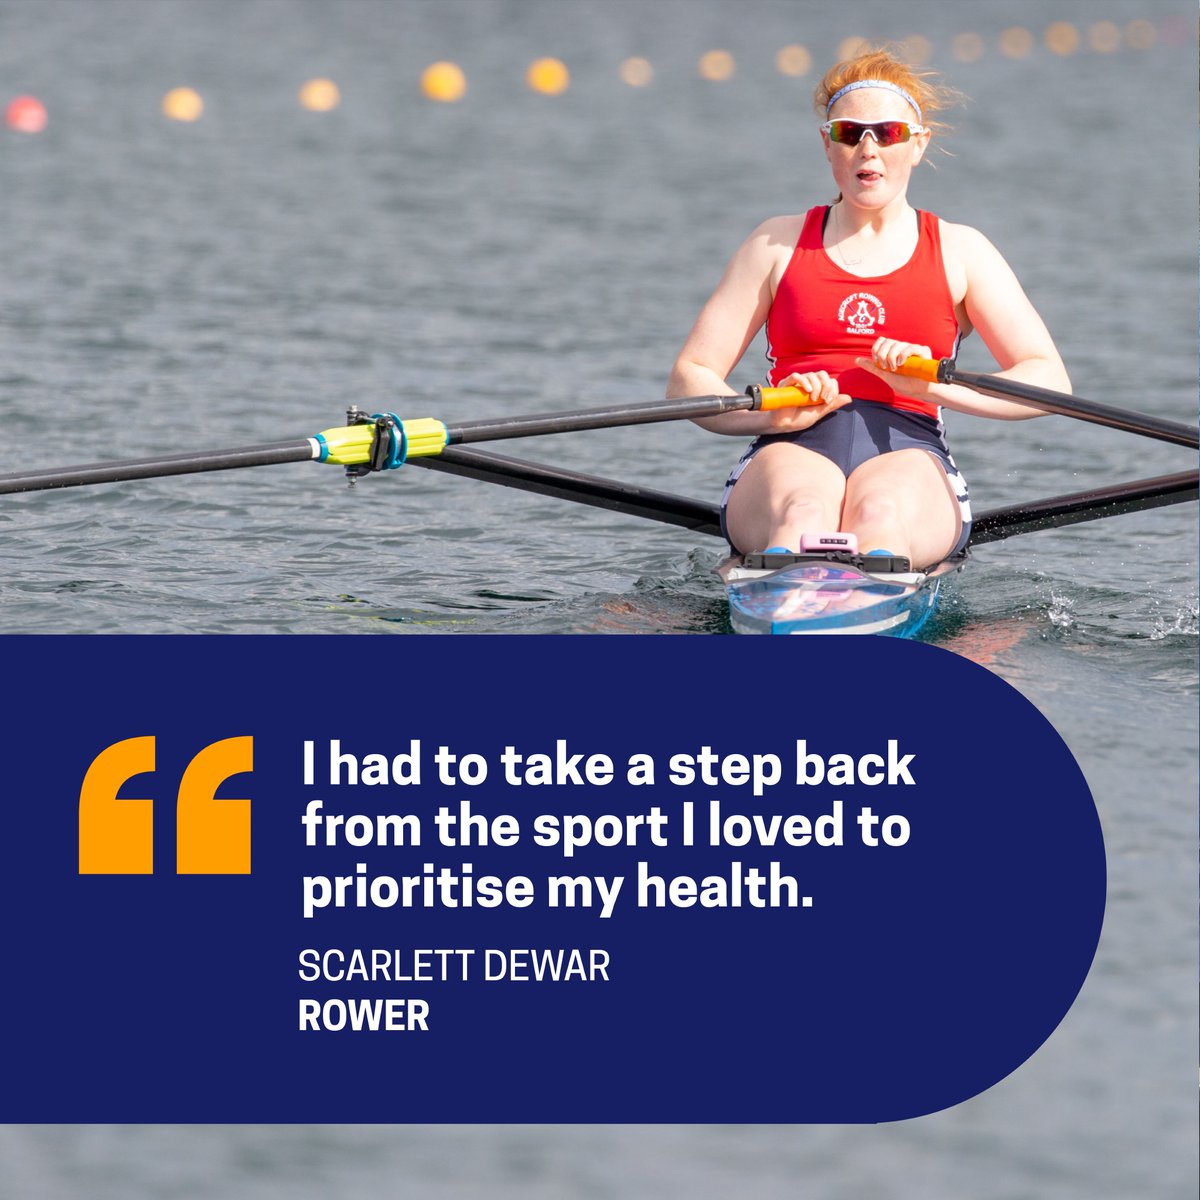 🚣‍♀️ Meet aspiring rower, Scarlett. This #ChildrensMentalHealthWeek we spoke with her about her struggles with RED-S and how it's impacted her sporting career. She advocates for early intervention, and physical and mental support. @Place2Be #MyVoiceMatters #MentalHealth